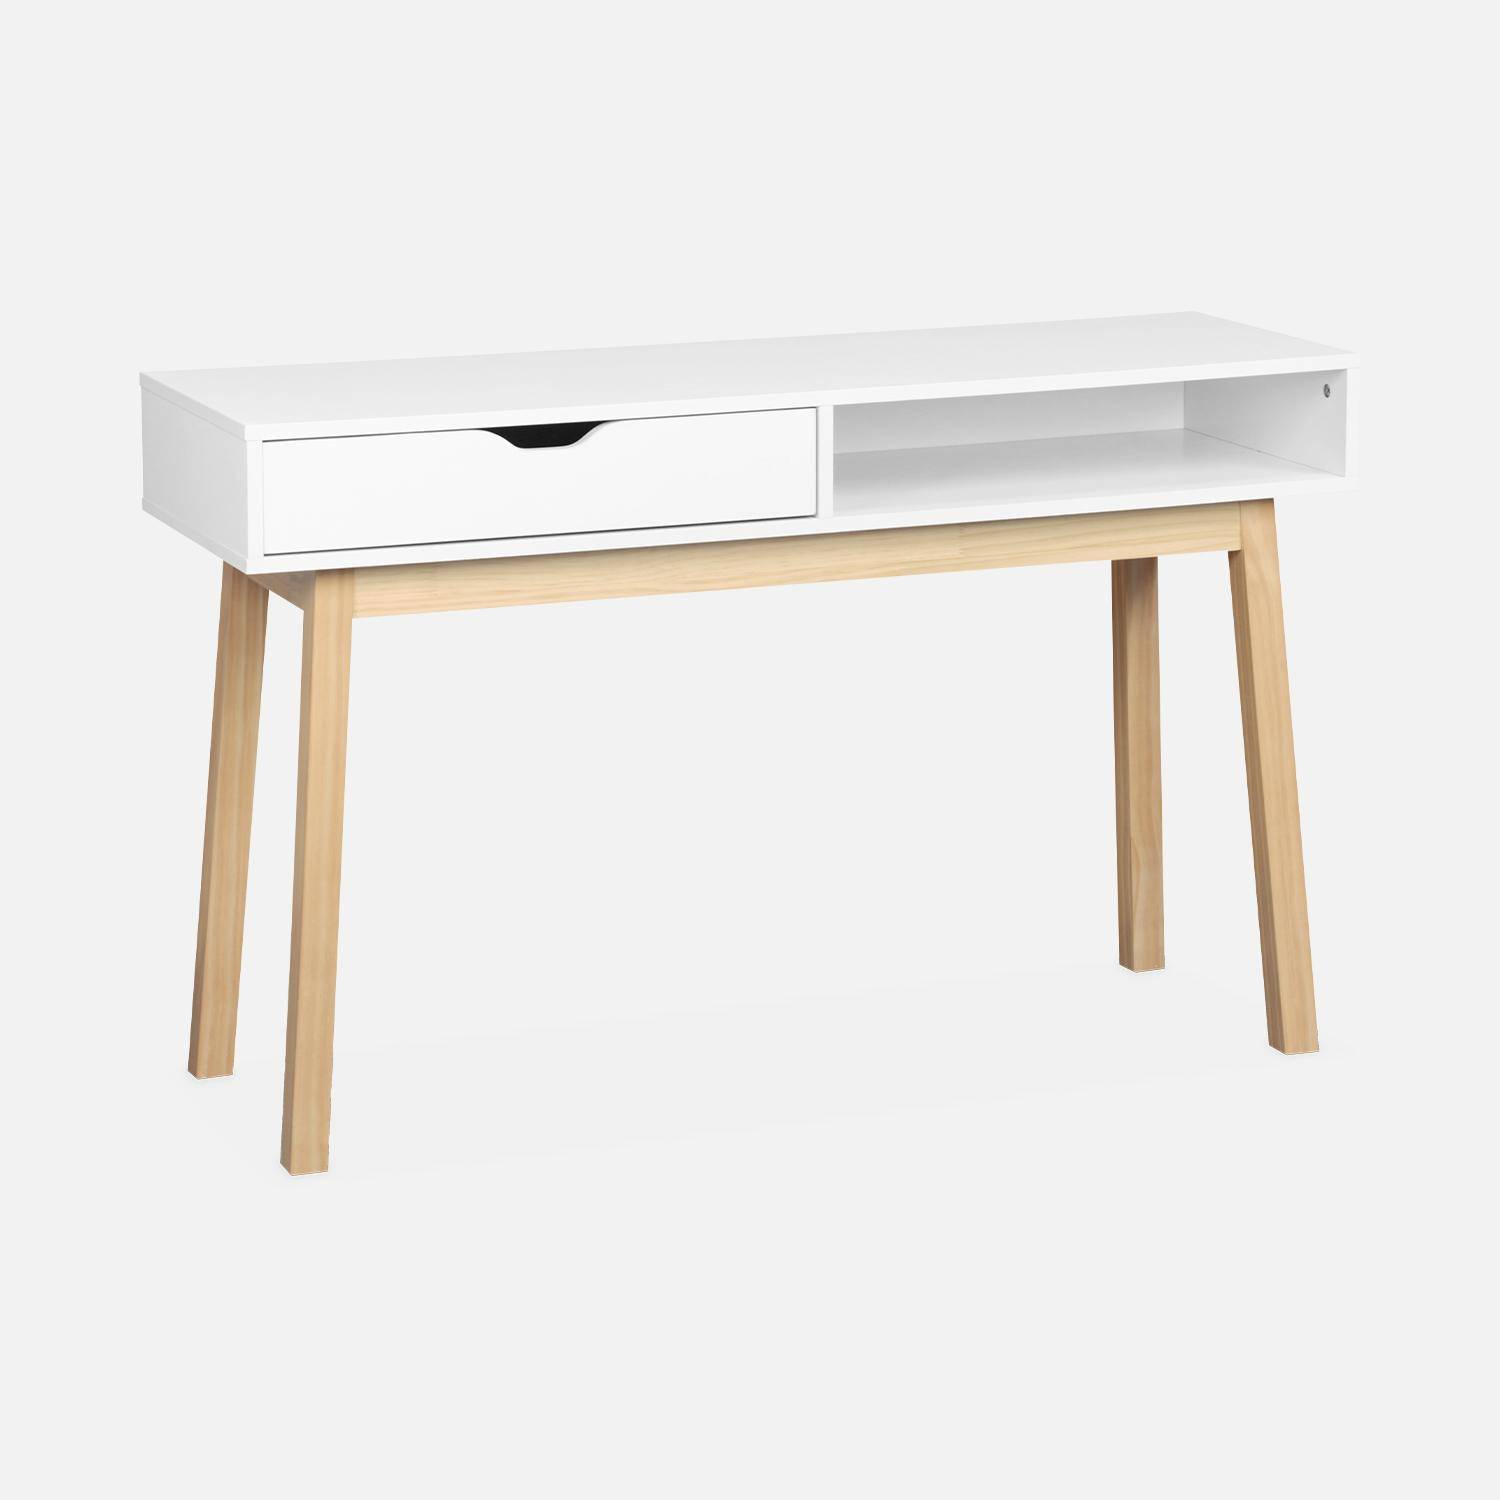 L119cm x W37cm x H74.5cm, Console with Wood Effect and Wooden Legs, 1 Drawer, white,  Photo3